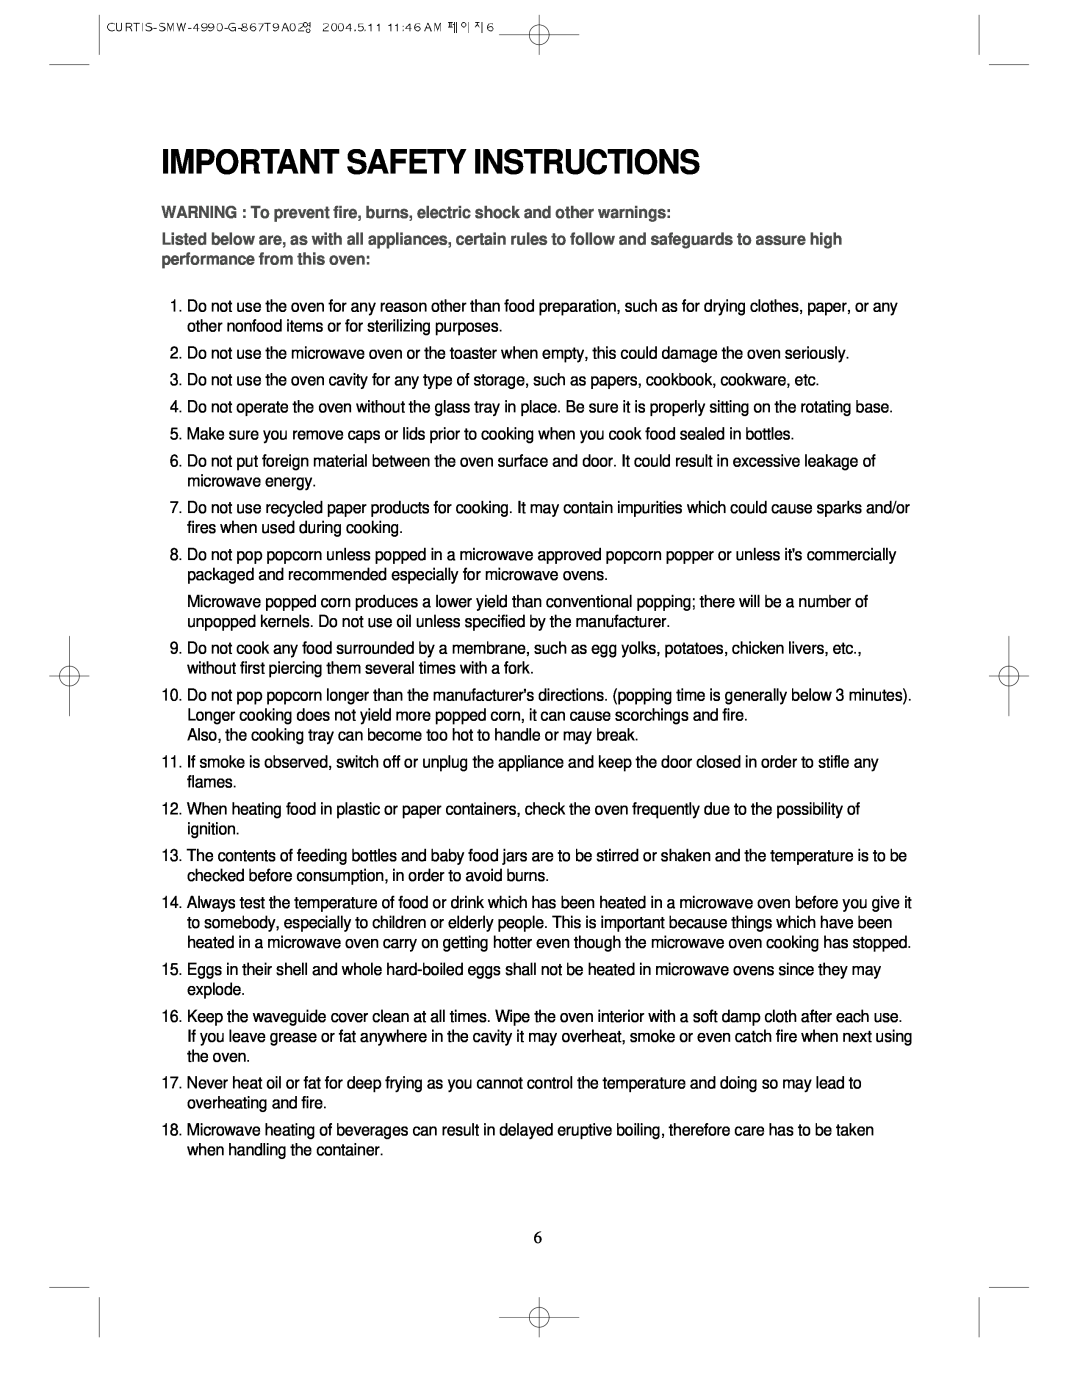 Sunbeam SMW-4990 manual Important Safety Instructions, WARNING To prevent fire, burns, electric shock and other warnings 